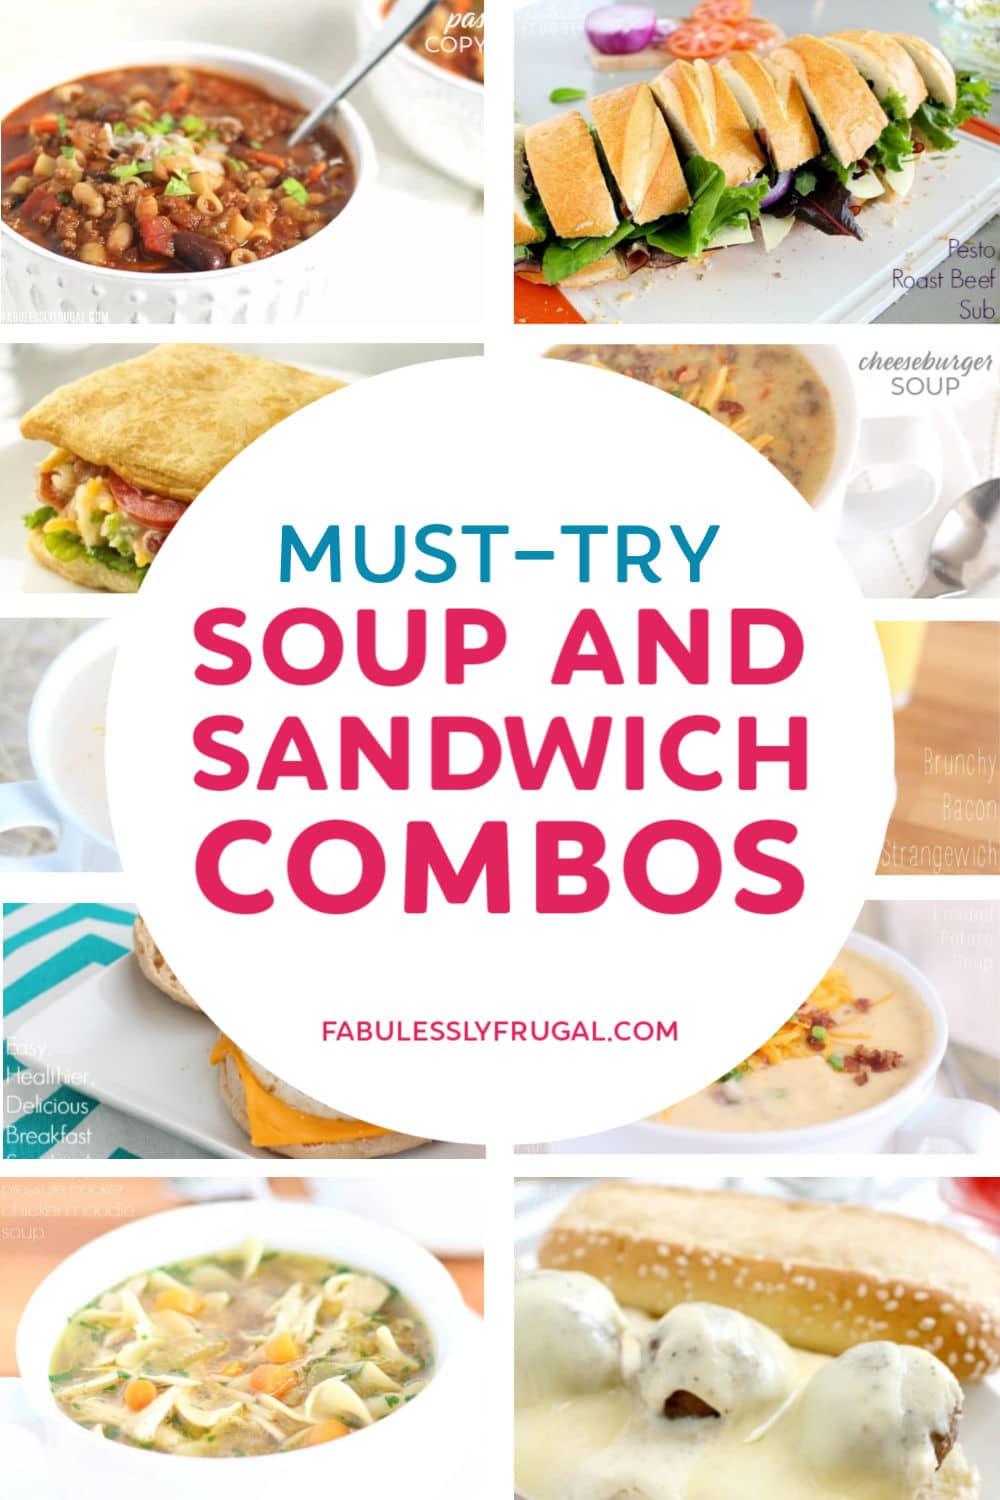 Soup and sandwich combos